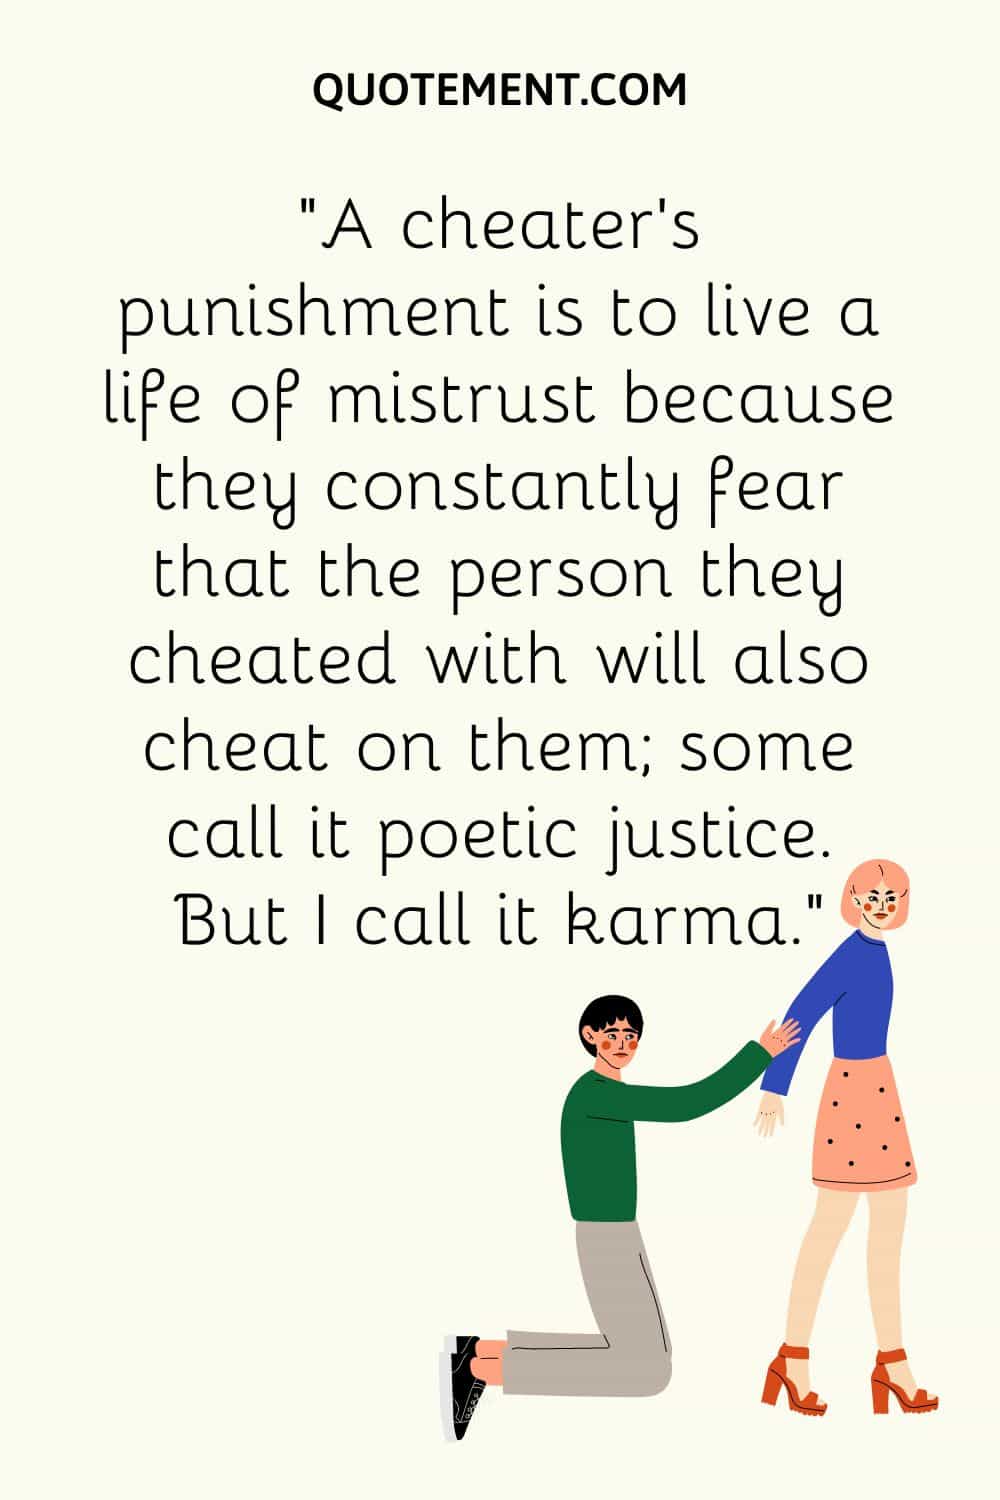 45 Best Karma Cheating Quotes To Help Deal With Infidelity